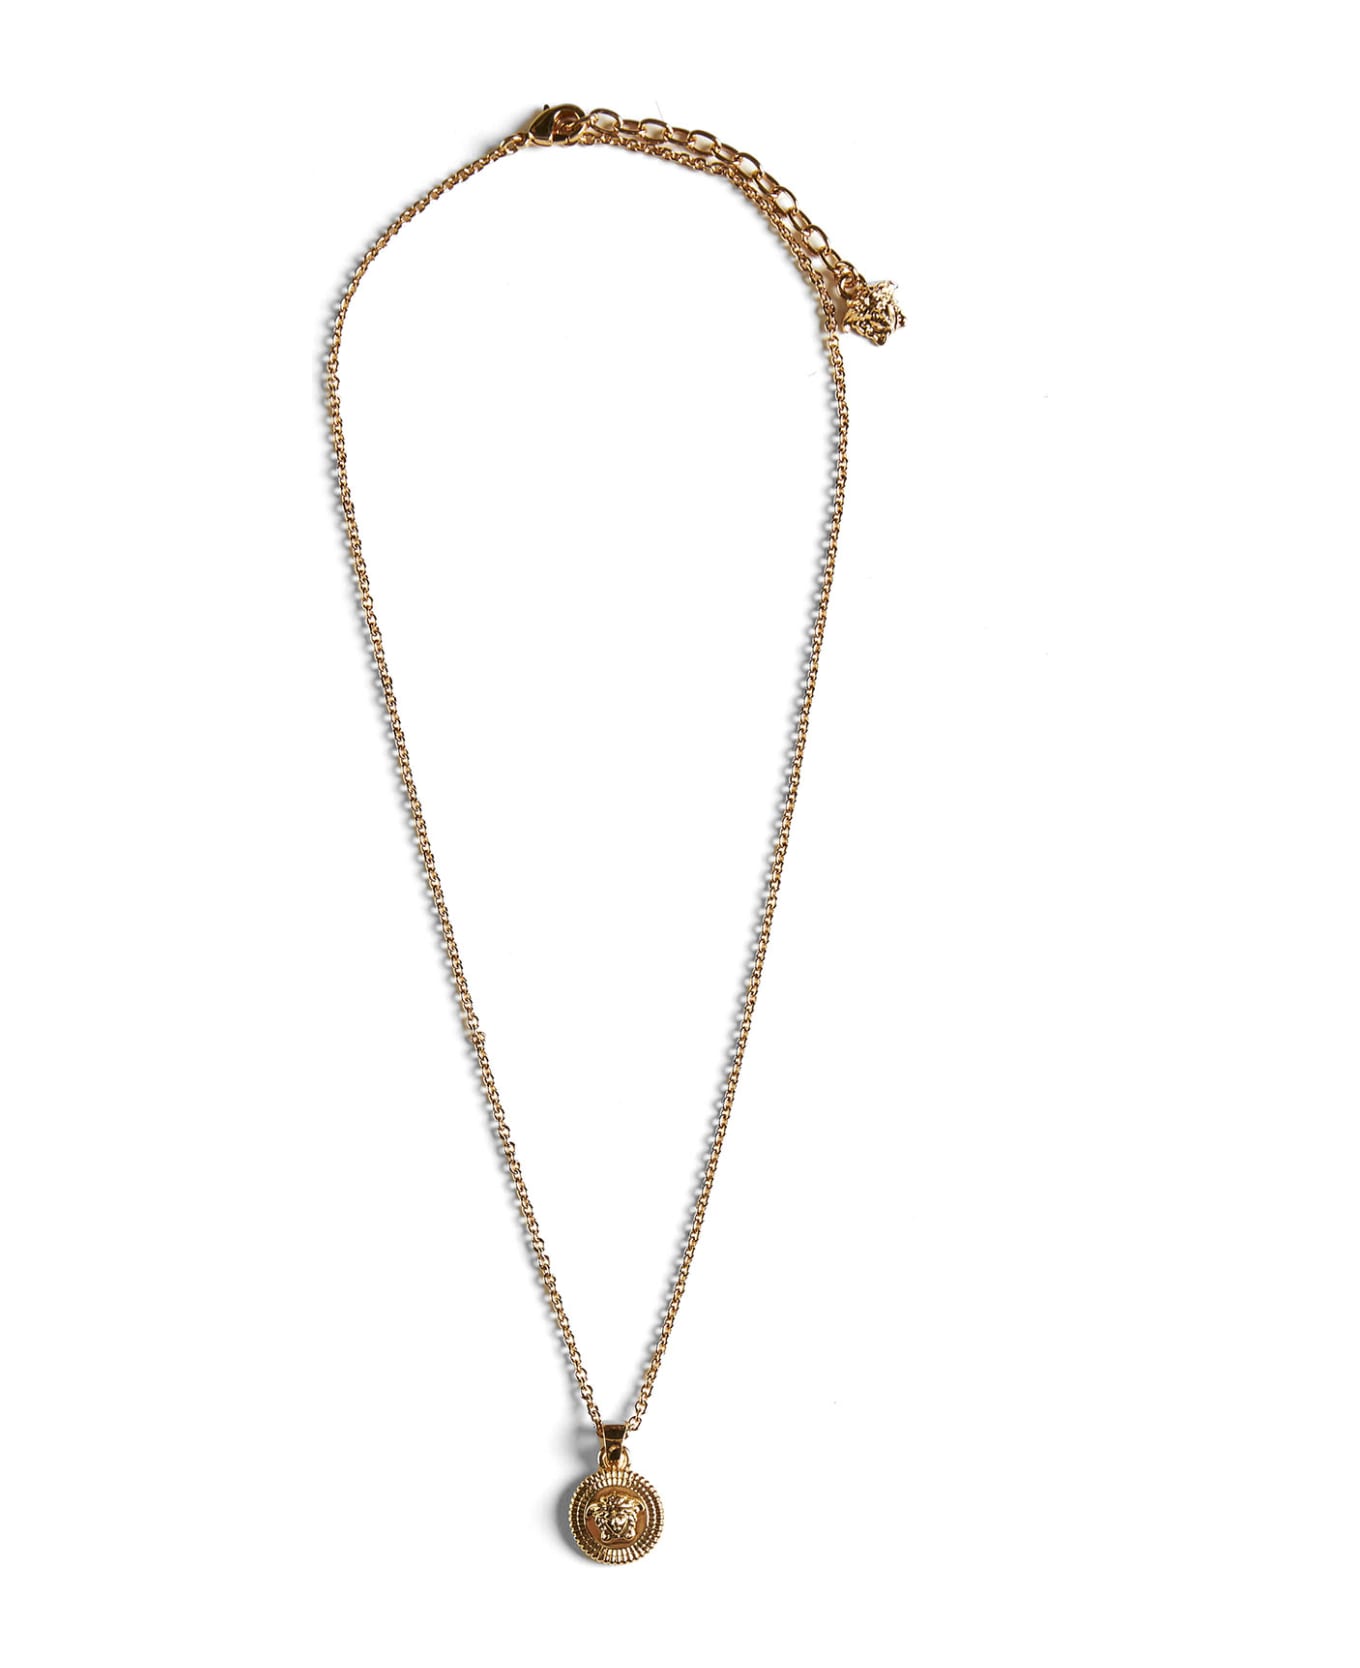 Versace Medusa Gold Brass Necklace - Versace Gold ネックレス